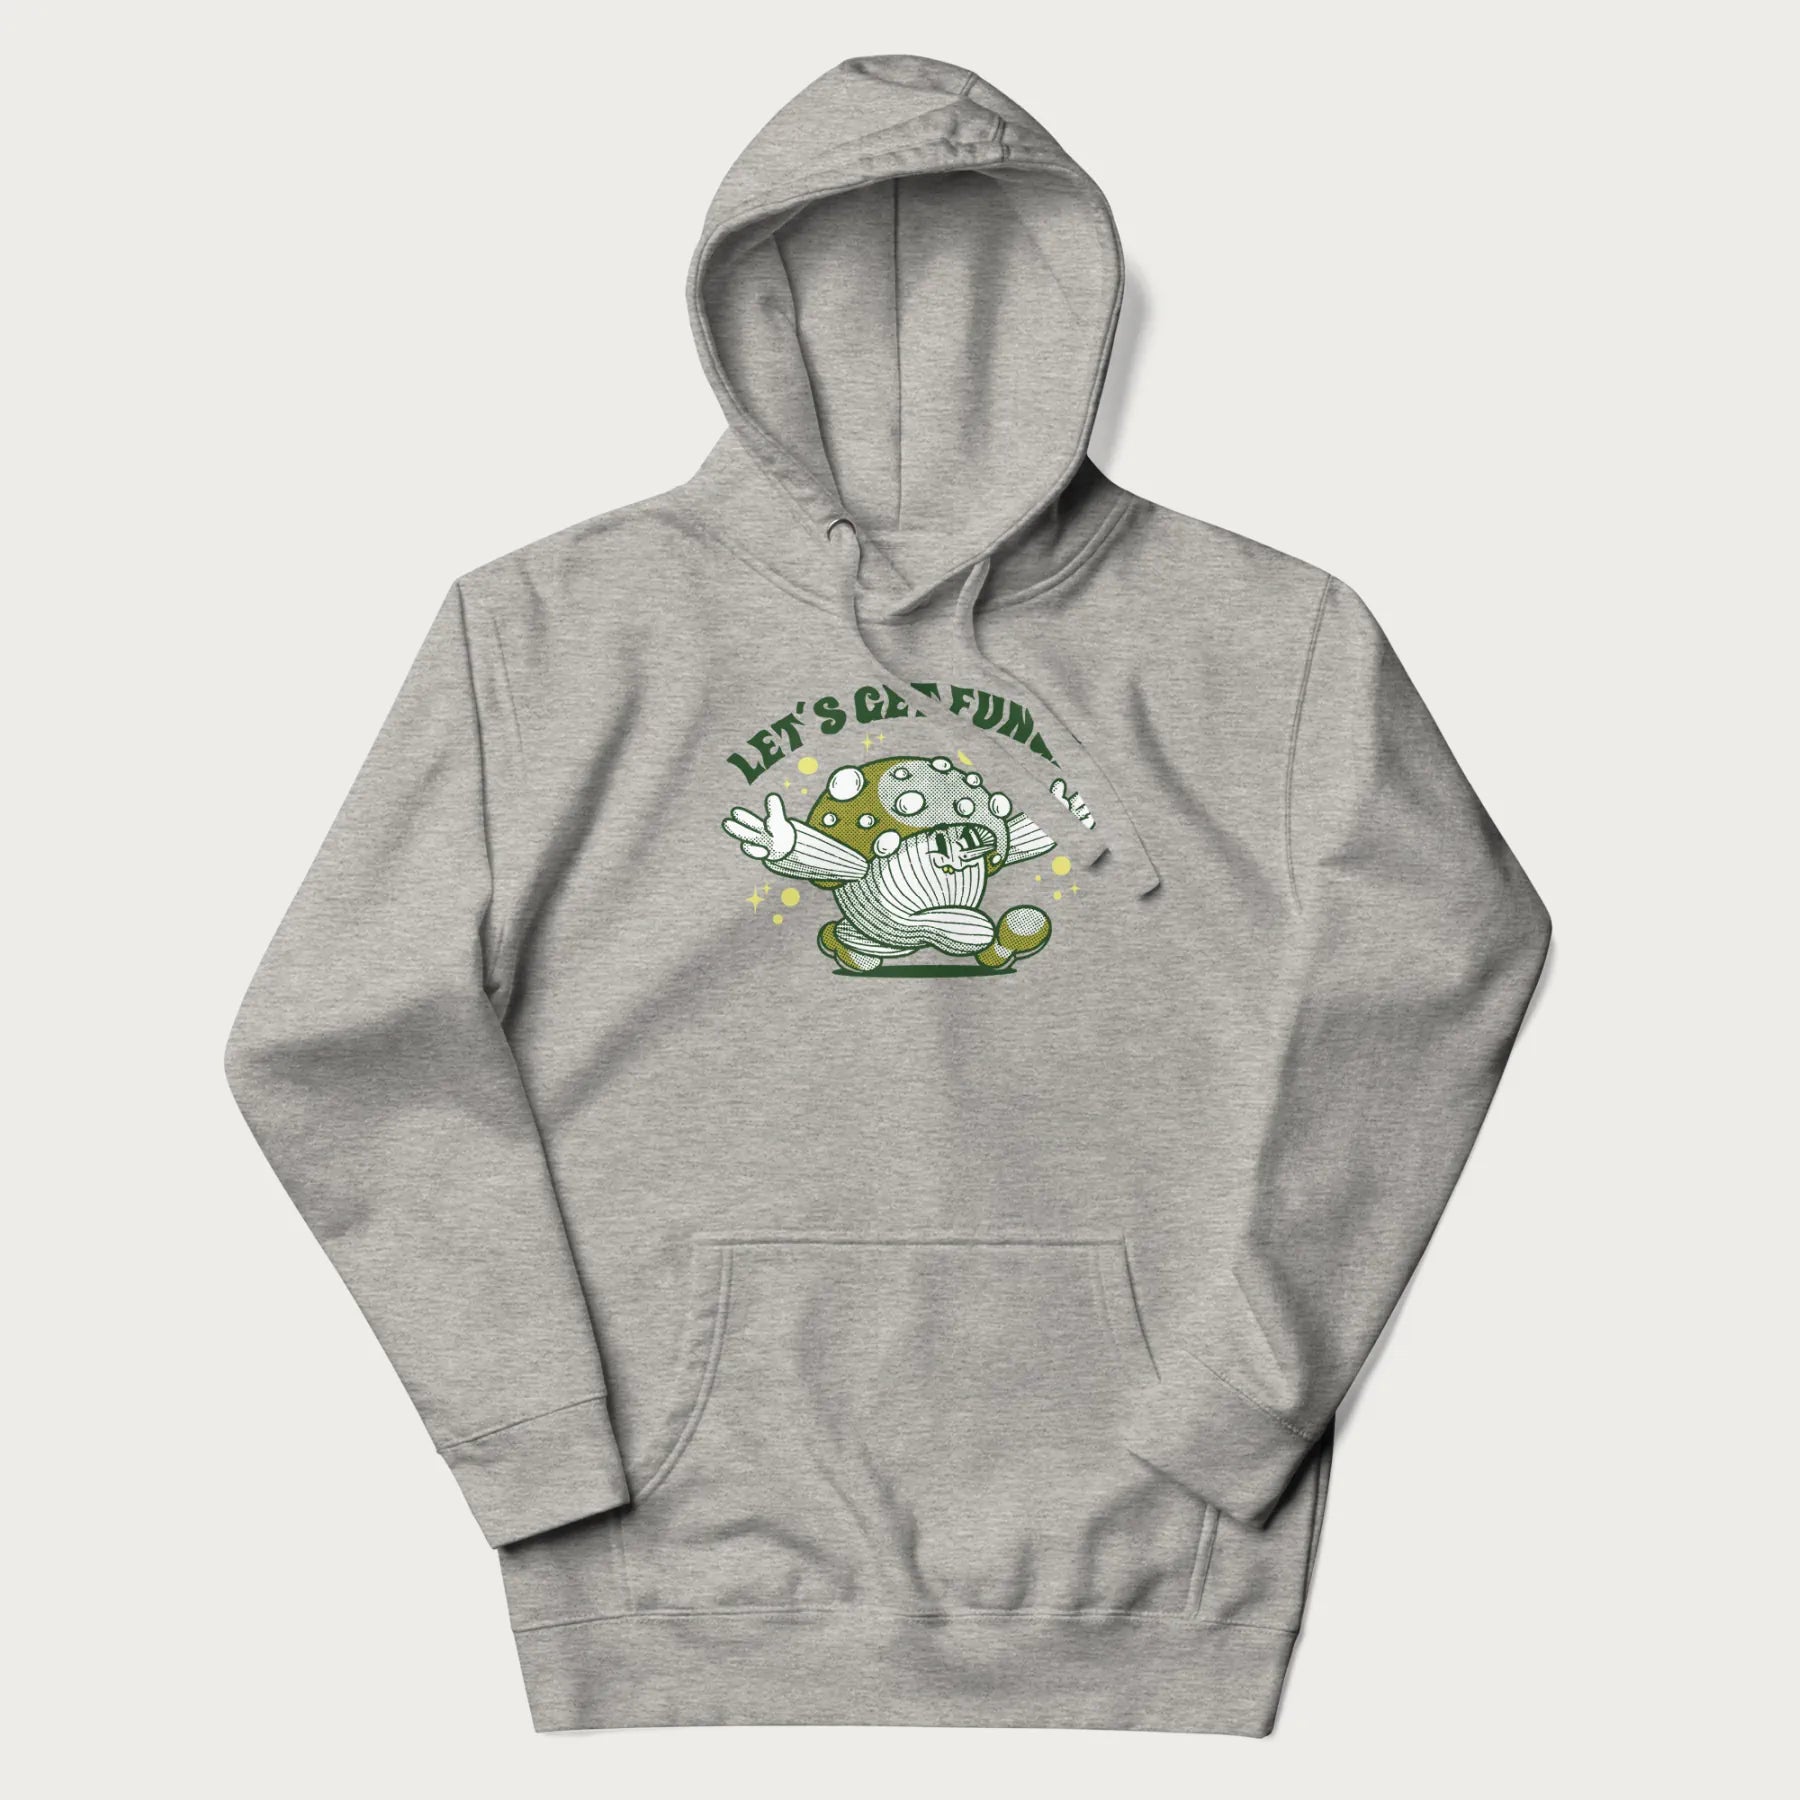 Light grey hoodie with a retro-inspired graphic of a mushroom mascot character and the text 'Let's Get Fungi'.